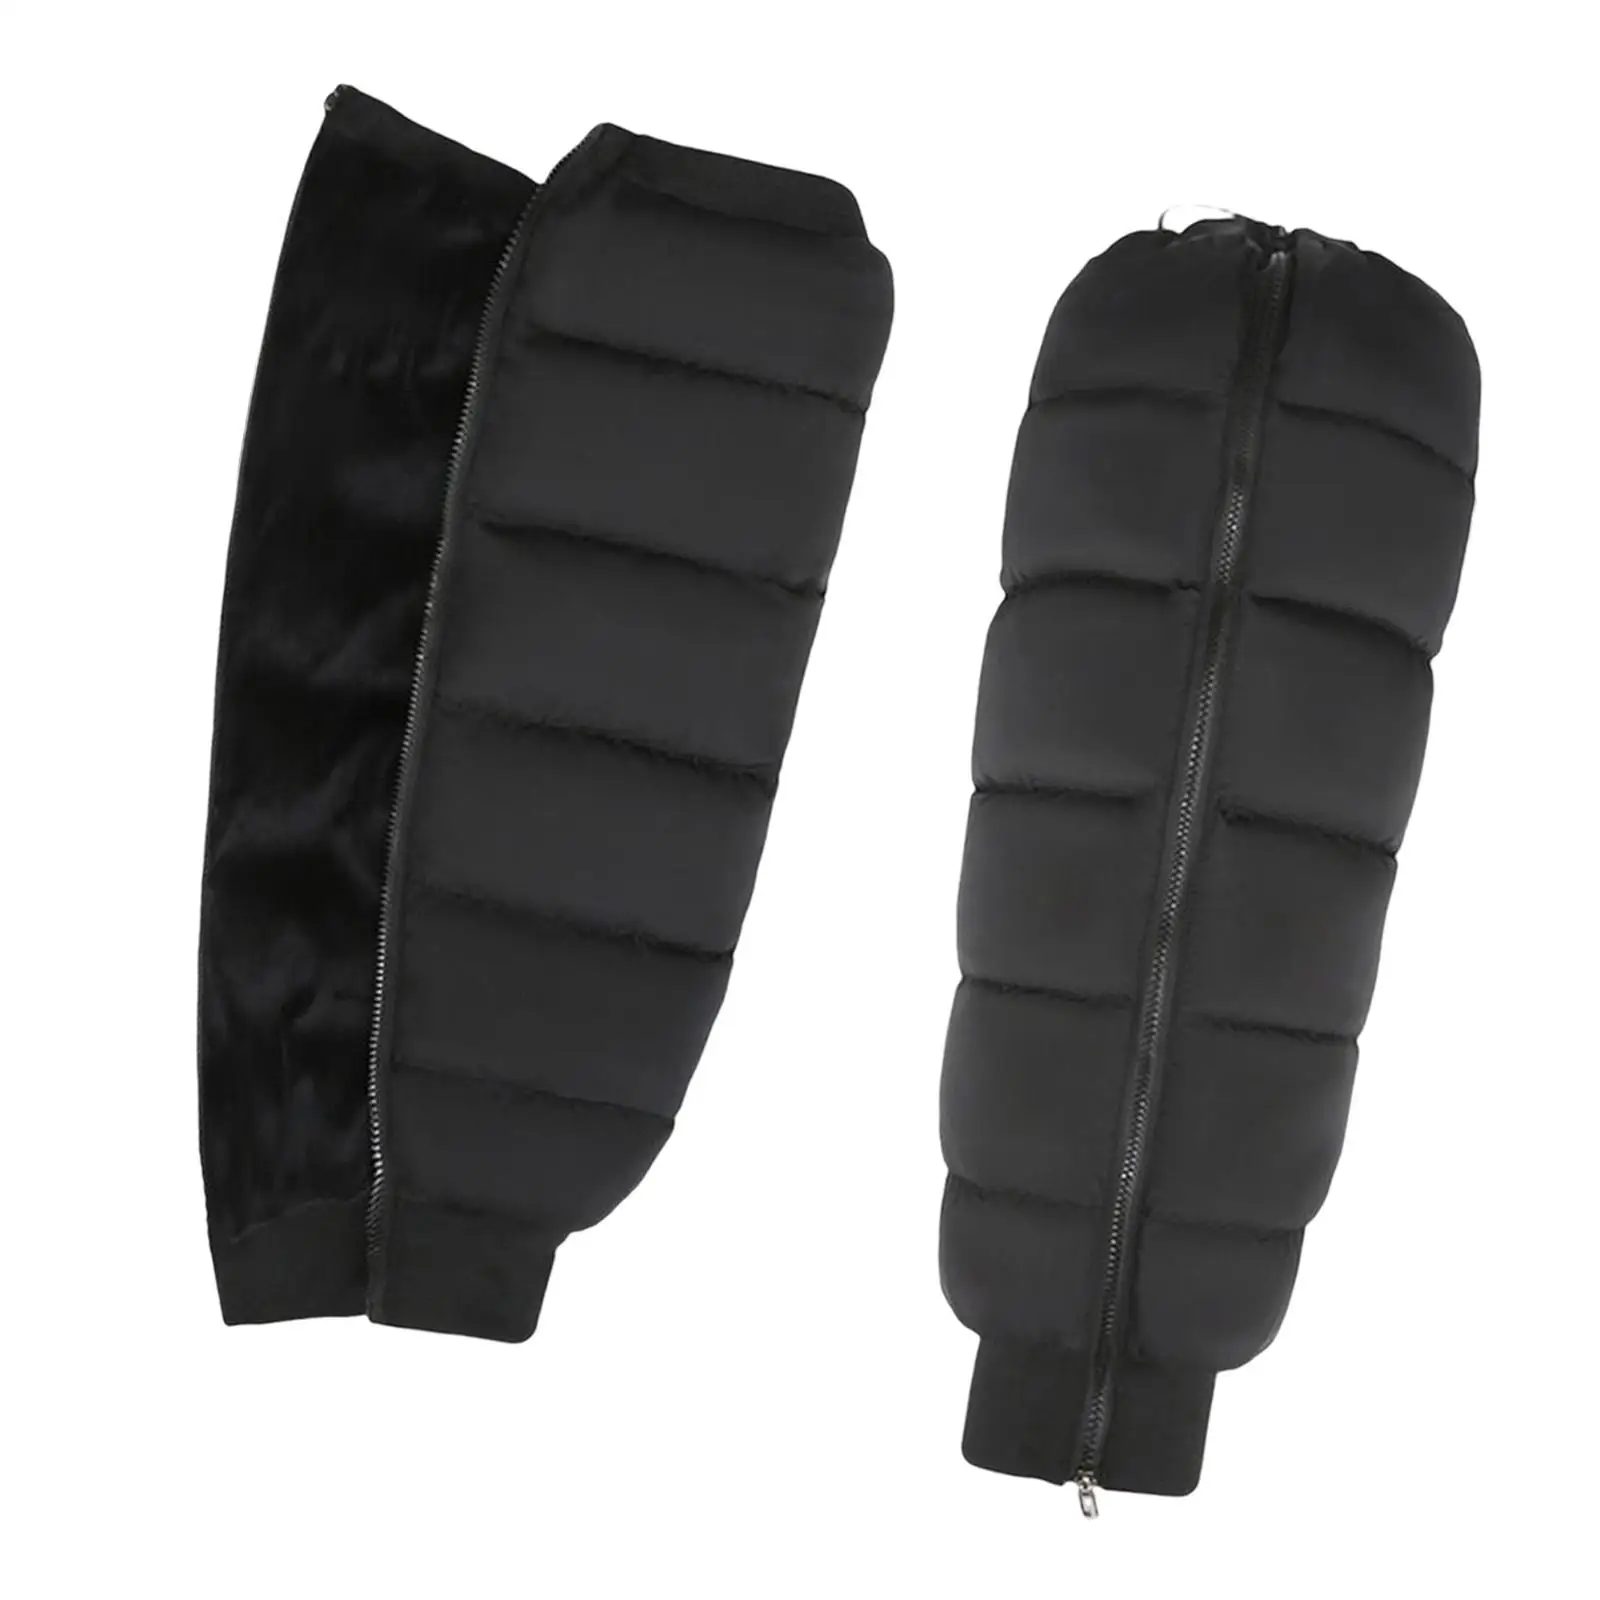 2 Packs Winter Knee Pads Protective Gear Windproof Protection for